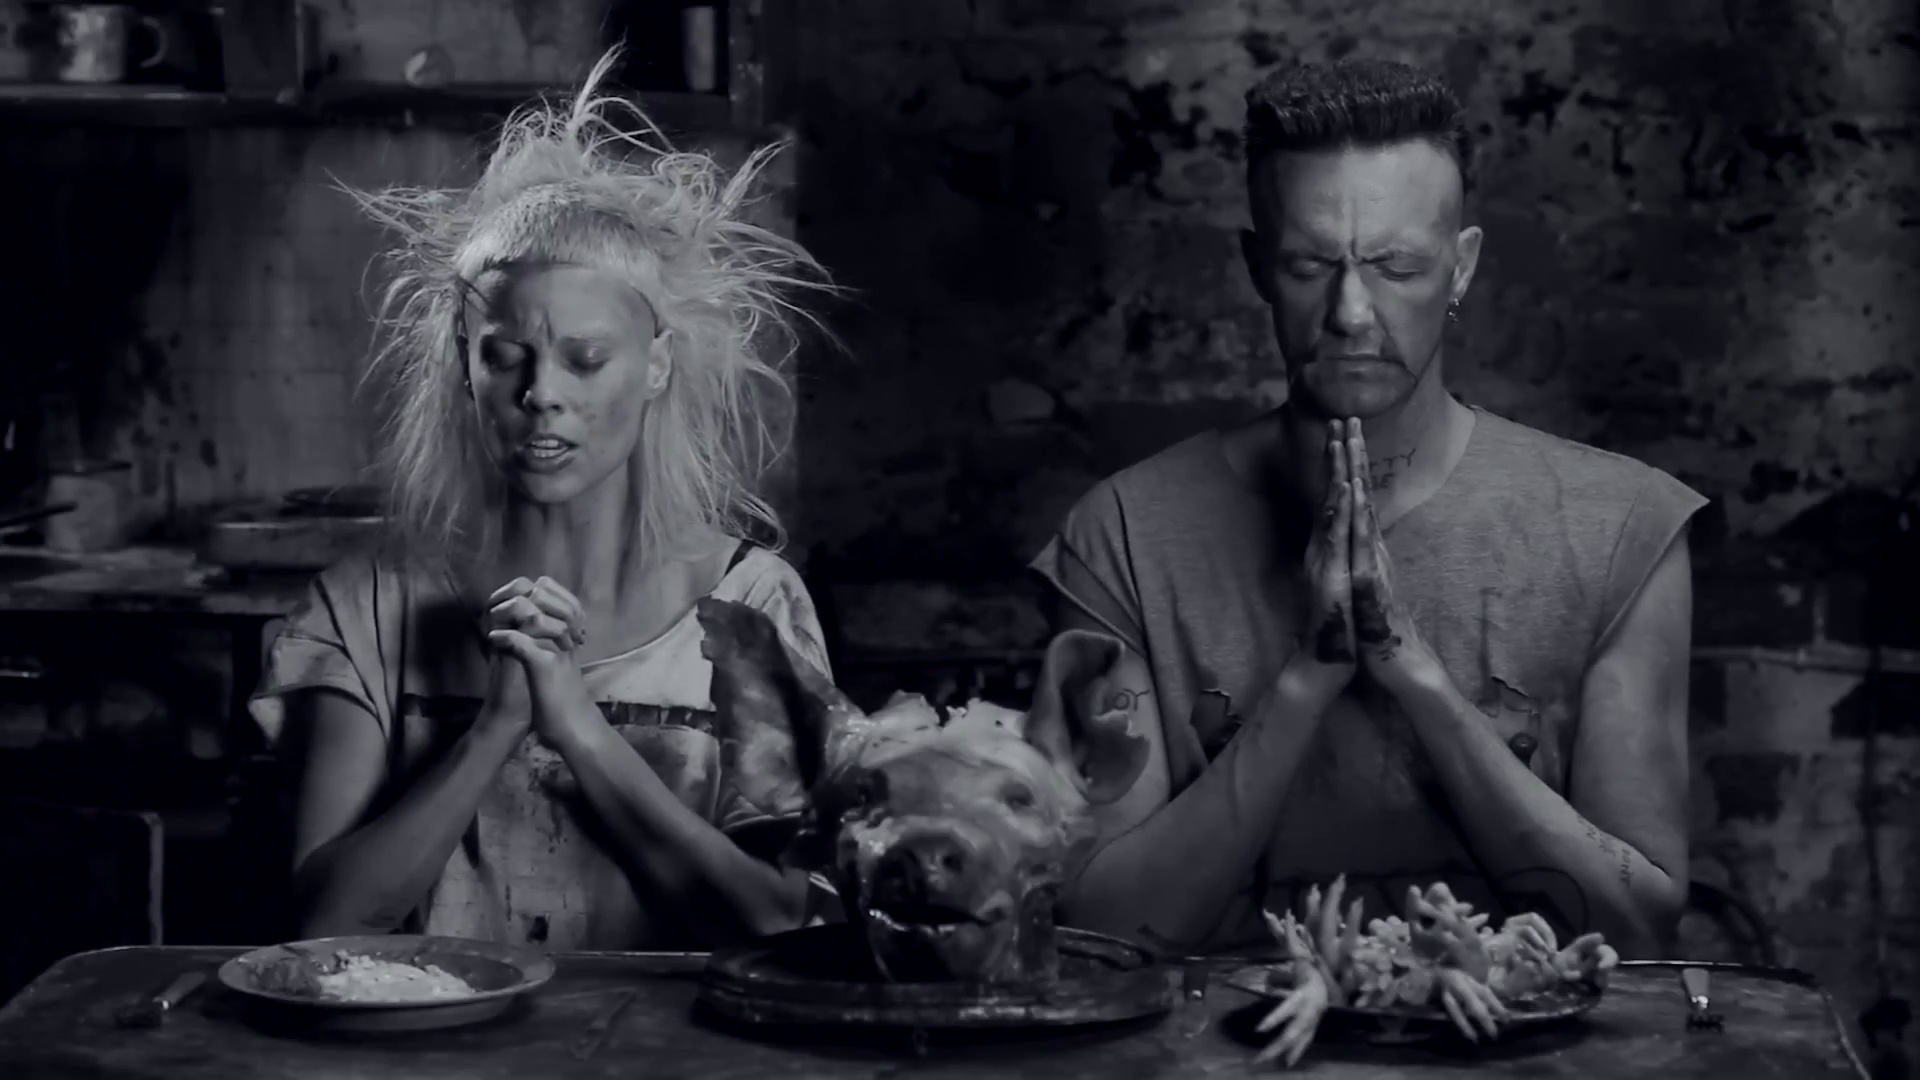 Die Antwoord: The band, Part of the South African counterculture movement known as zef. 1920x1080 Full HD Wallpaper.